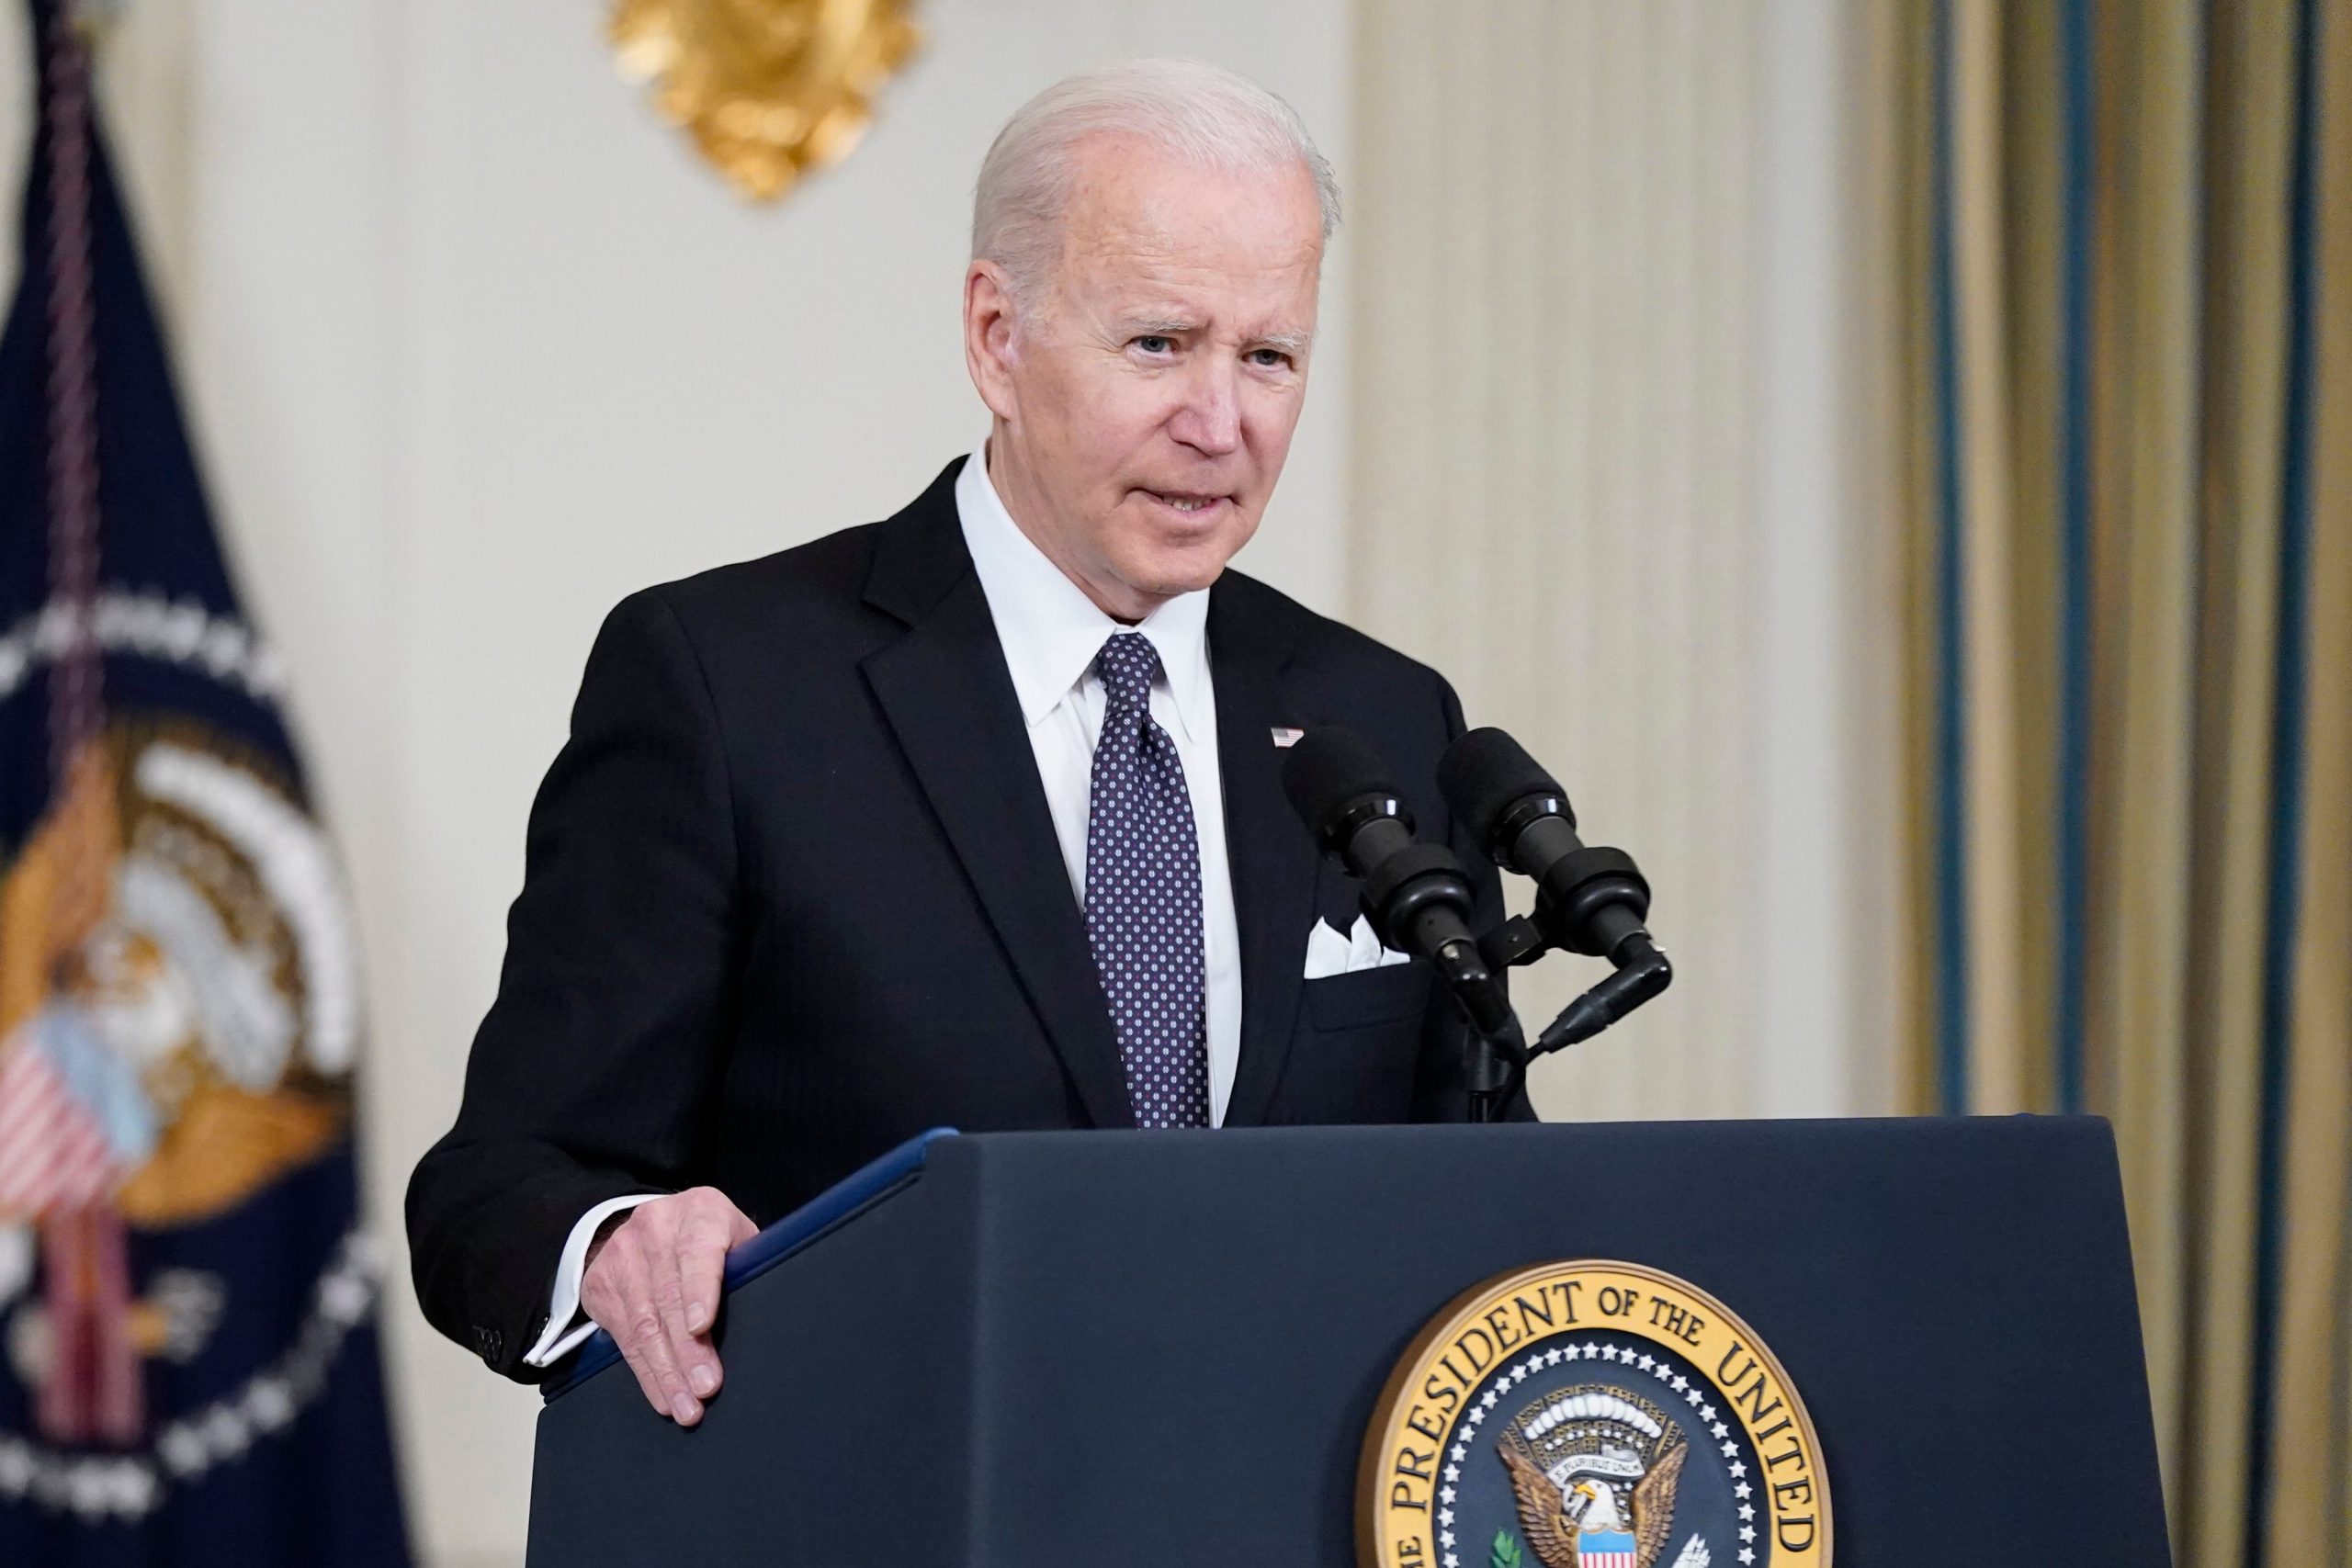 Joe Biden will wait on ‘actions’ to believe Russia’s claim of retrieving from Kyiv, Chernihiv